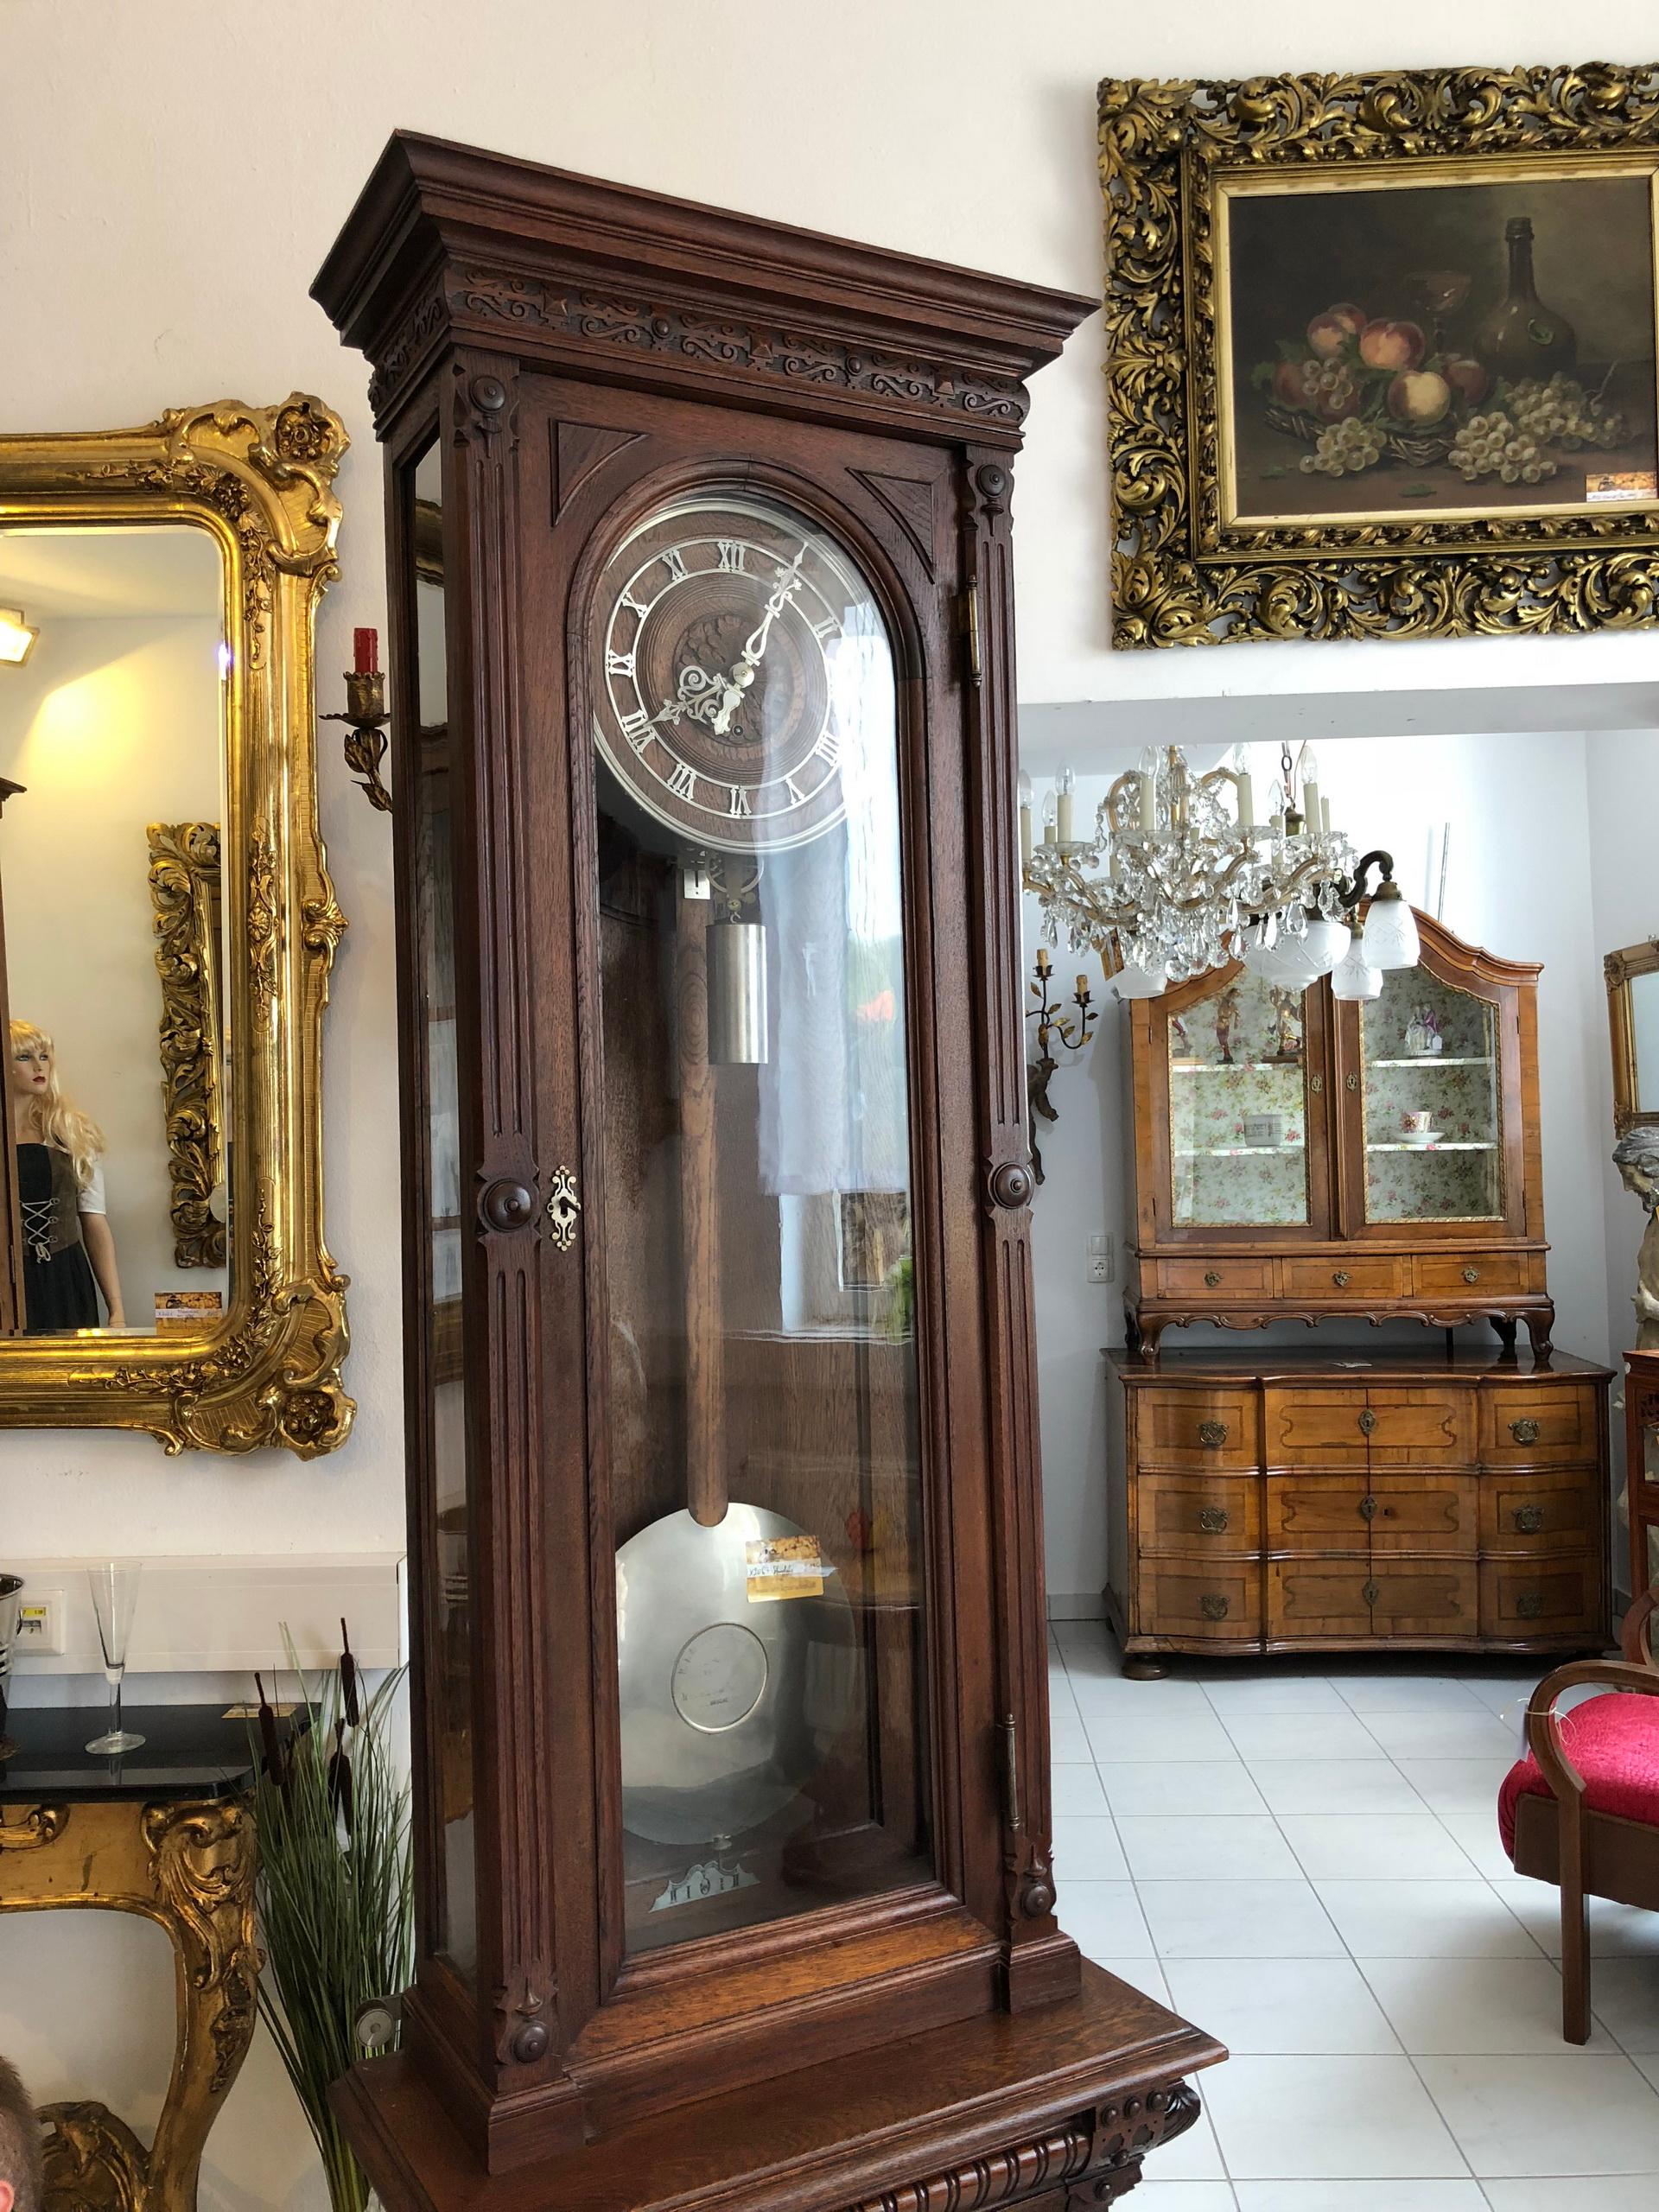 Antique wall clock from the time of historicism - one pendulum. Works for about a month for one wind up circle.
Original clock from the 1880s with an outstanding mechanism. The pendulum clock is well preserved, functional and an eye-catcher in